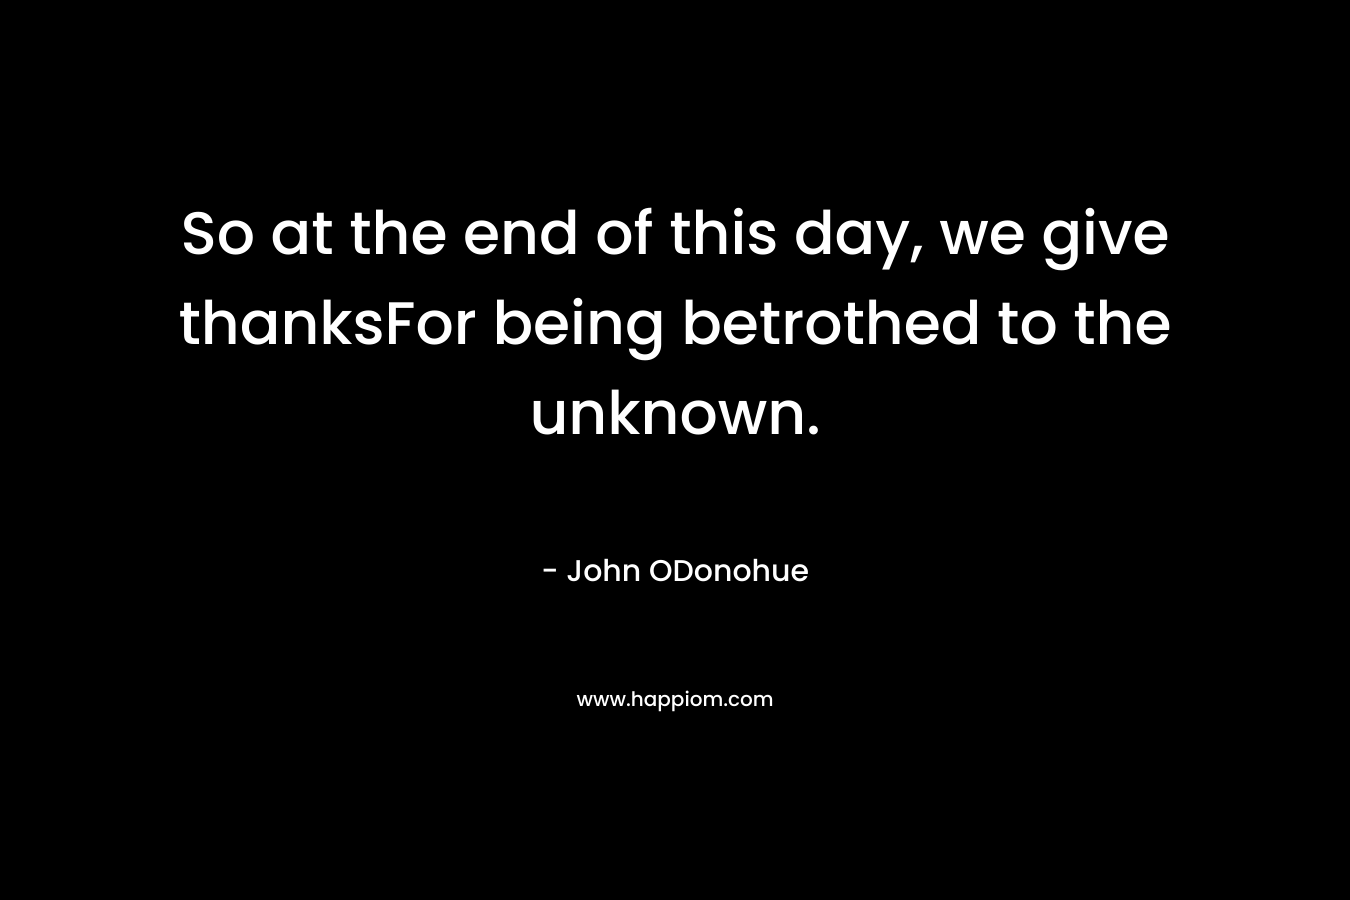 So at the end of this day, we give thanksFor being betrothed to the unknown.